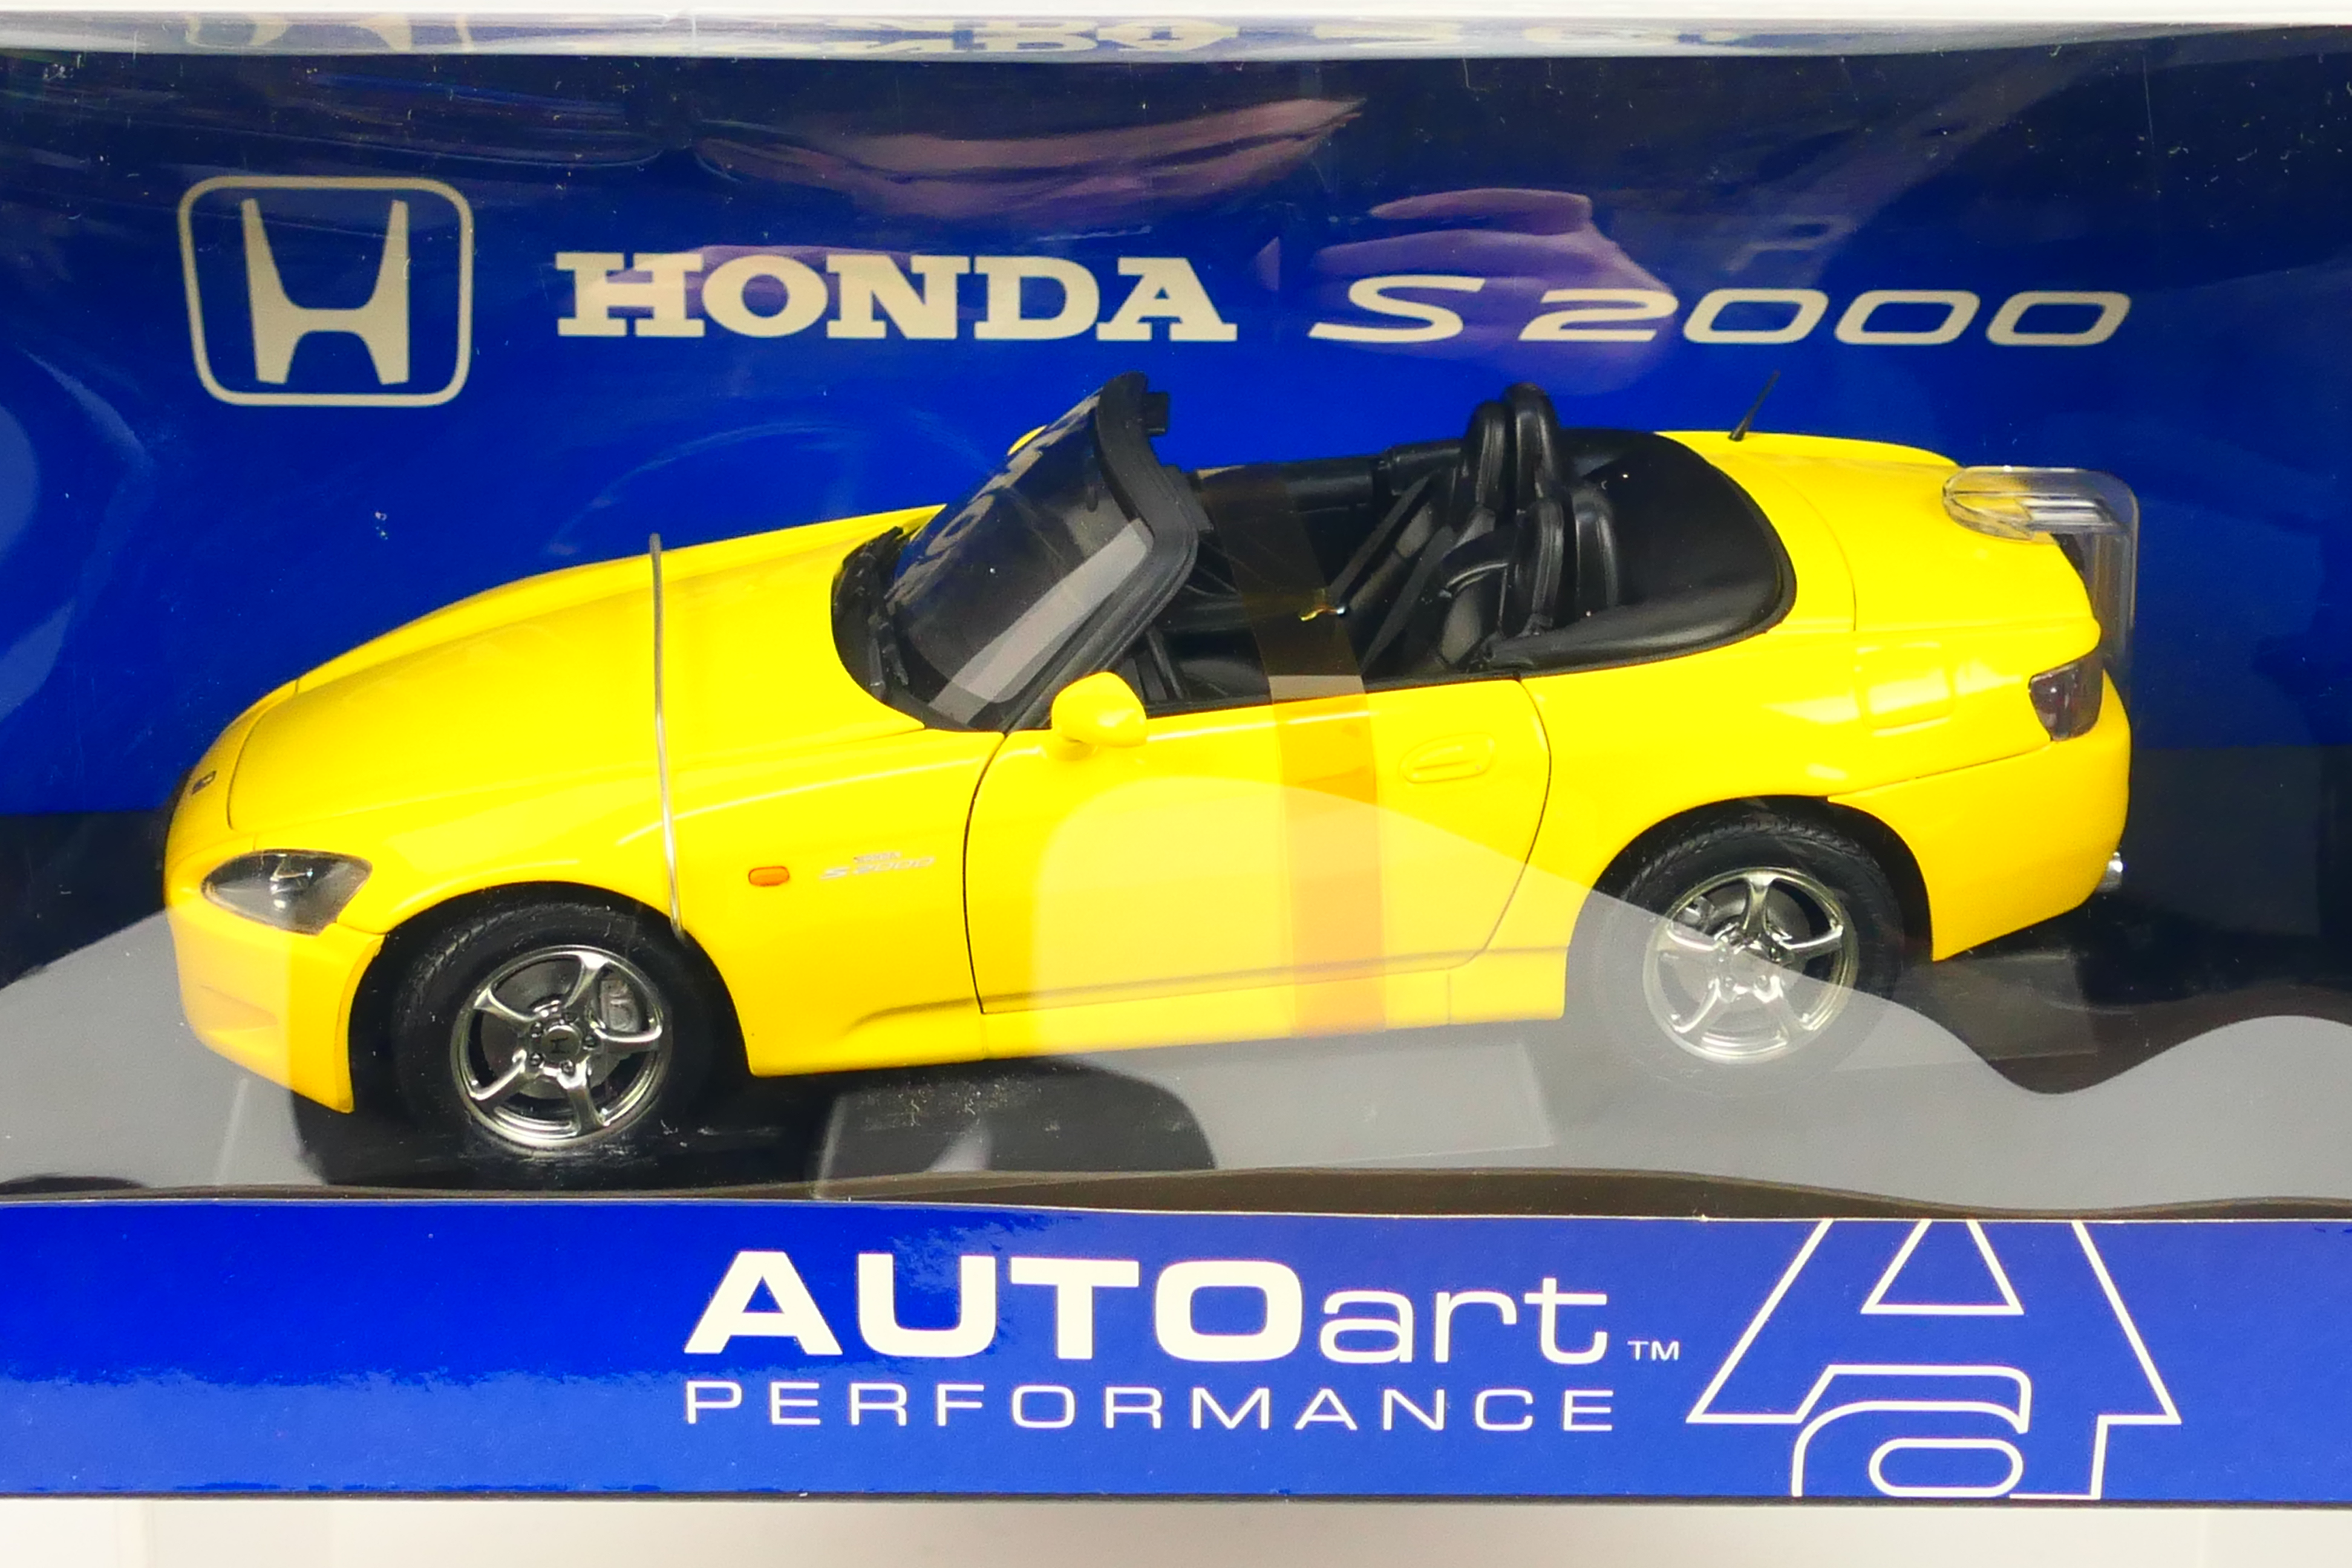 Auto Art - A boxed 1:18 scale Auo Art #727644 Honda S2000. - Image 2 of 3